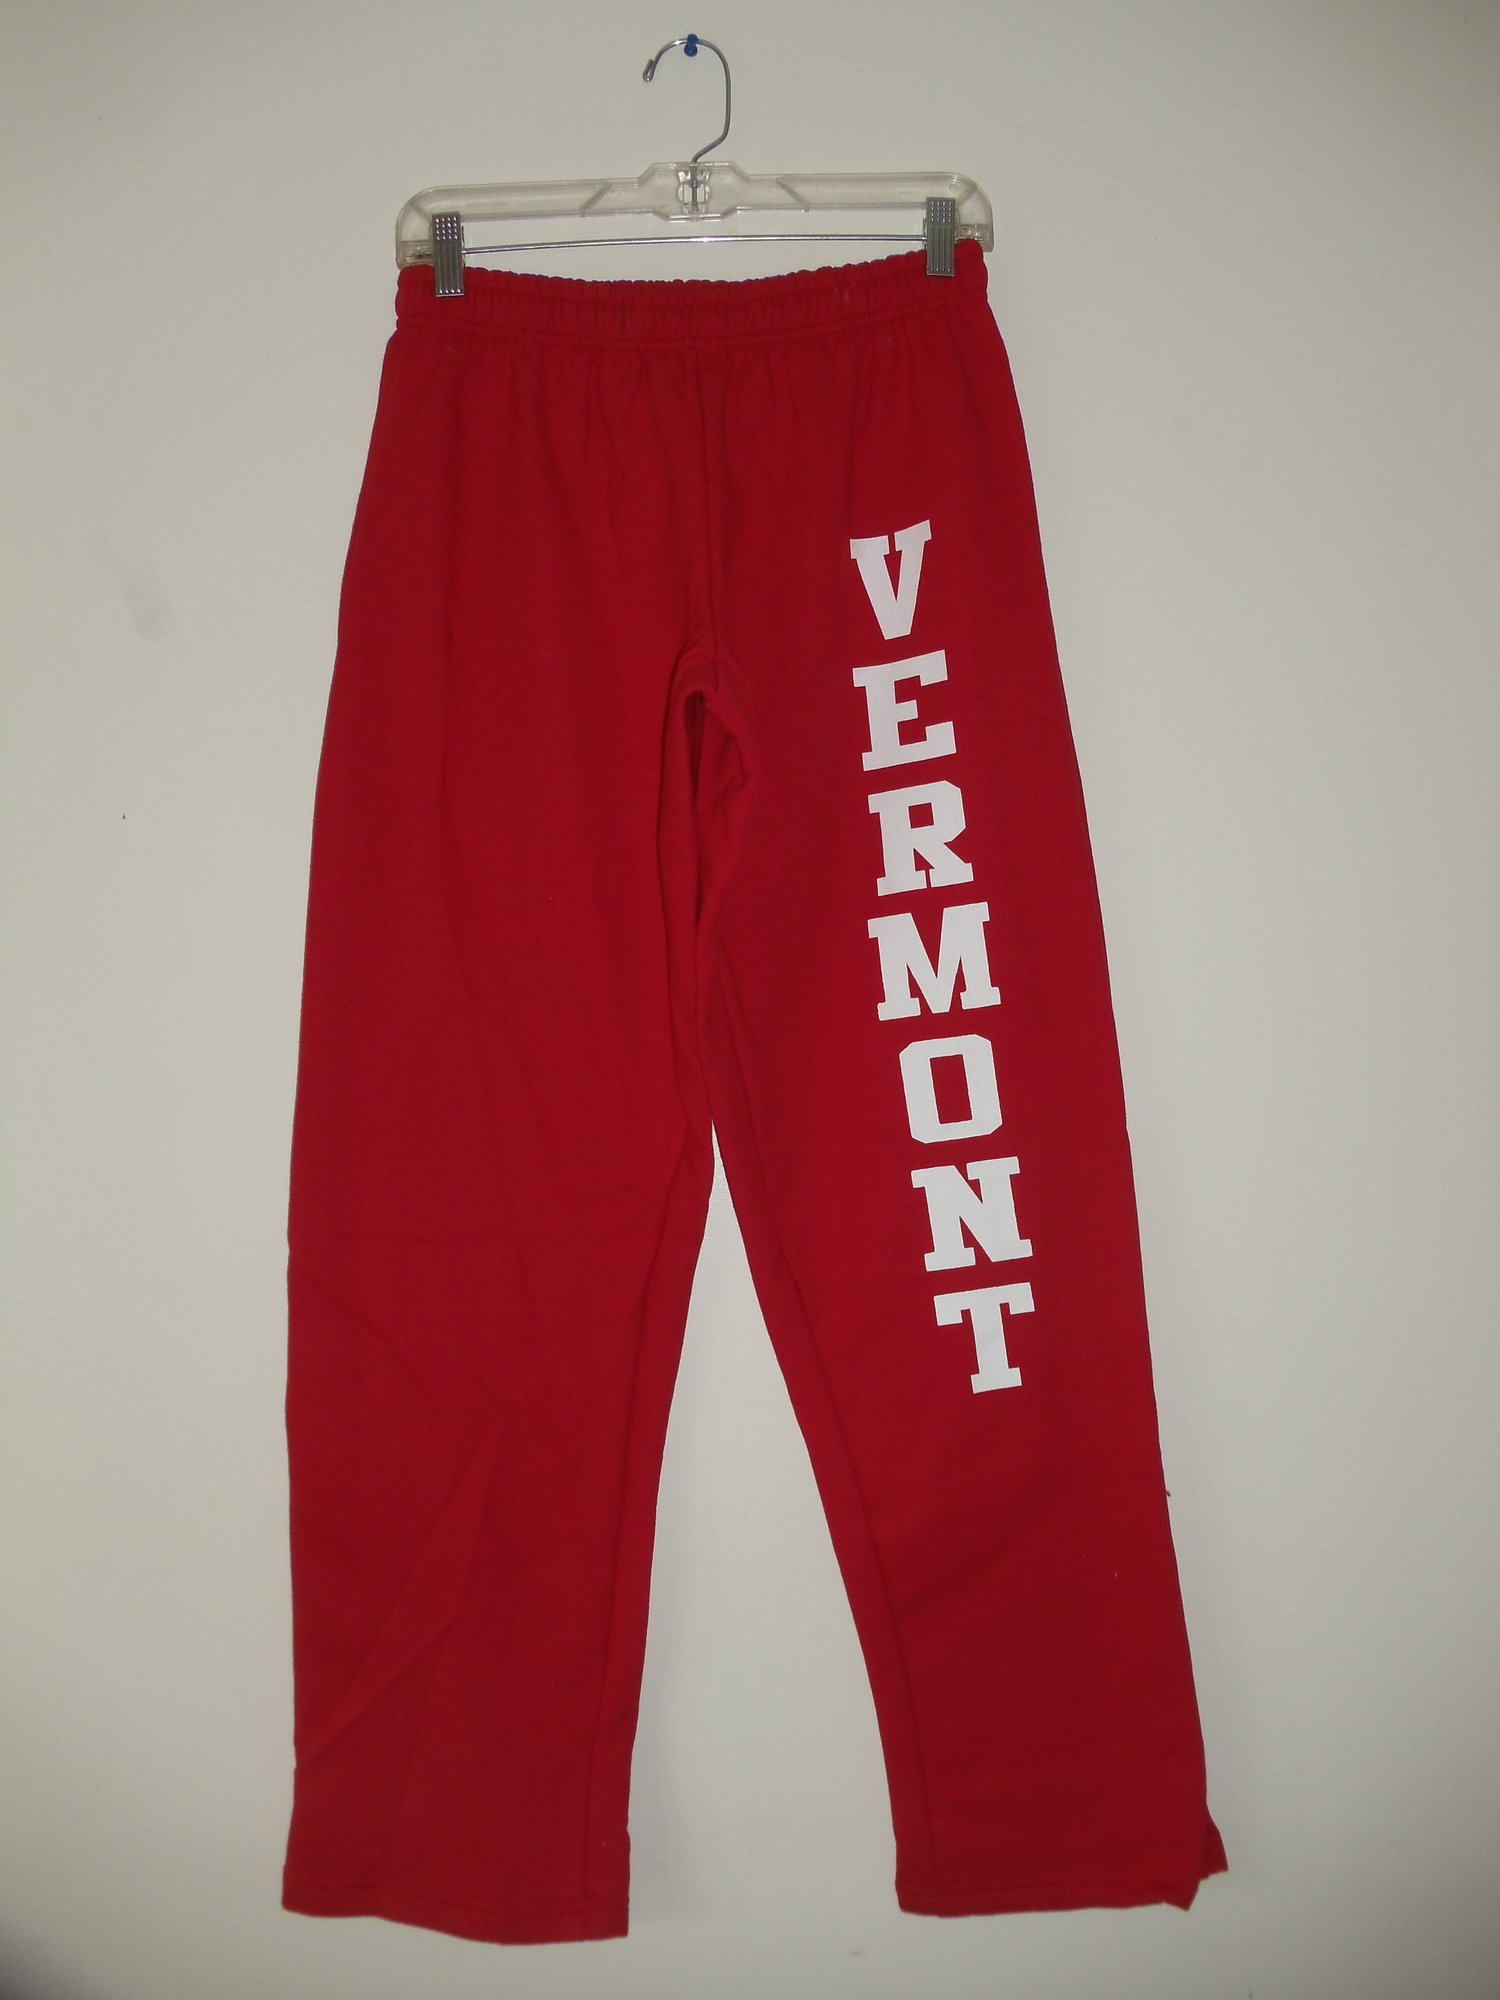 Image of Vermont Sweatpants 8oz White on Red - Vermont clothing - 802 clothing - 802 store